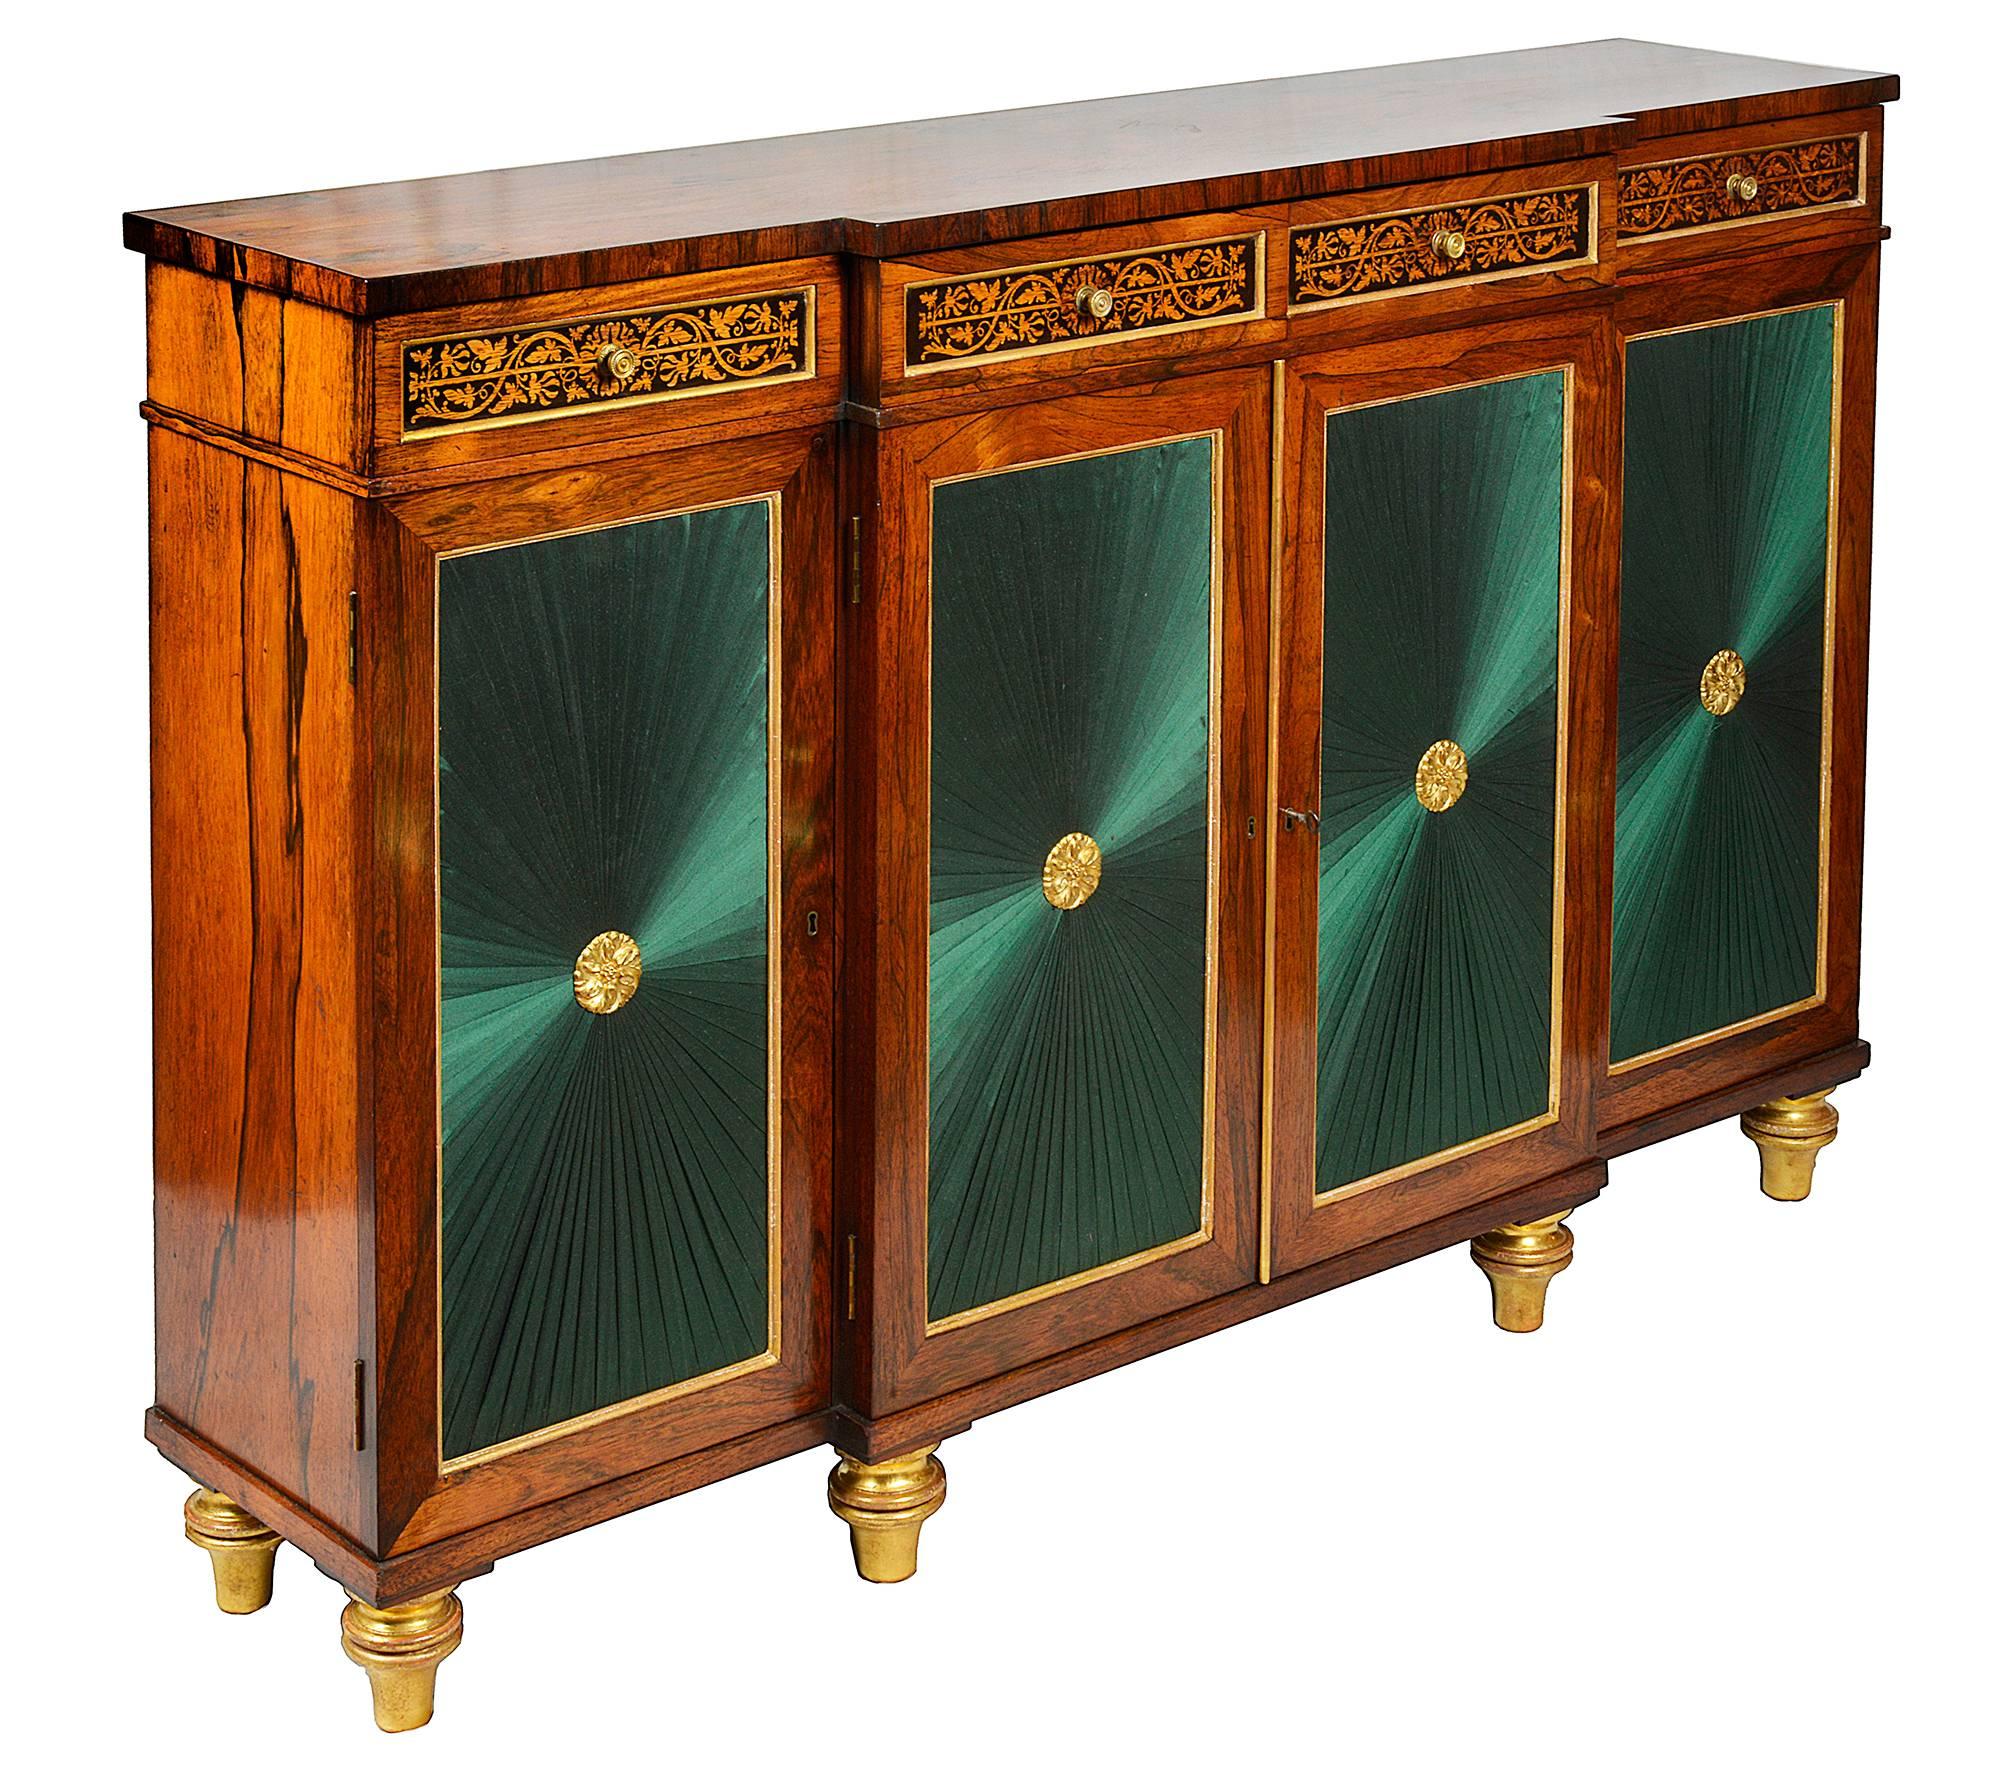 A very good quality Regency period Rosewood break fronted chiffonier side cabinet. Having marquetry inlaid decoration to the drawer fronts, gilded molding and pleated silk panels to the door fronts, raised on turned tapering gilded feet.